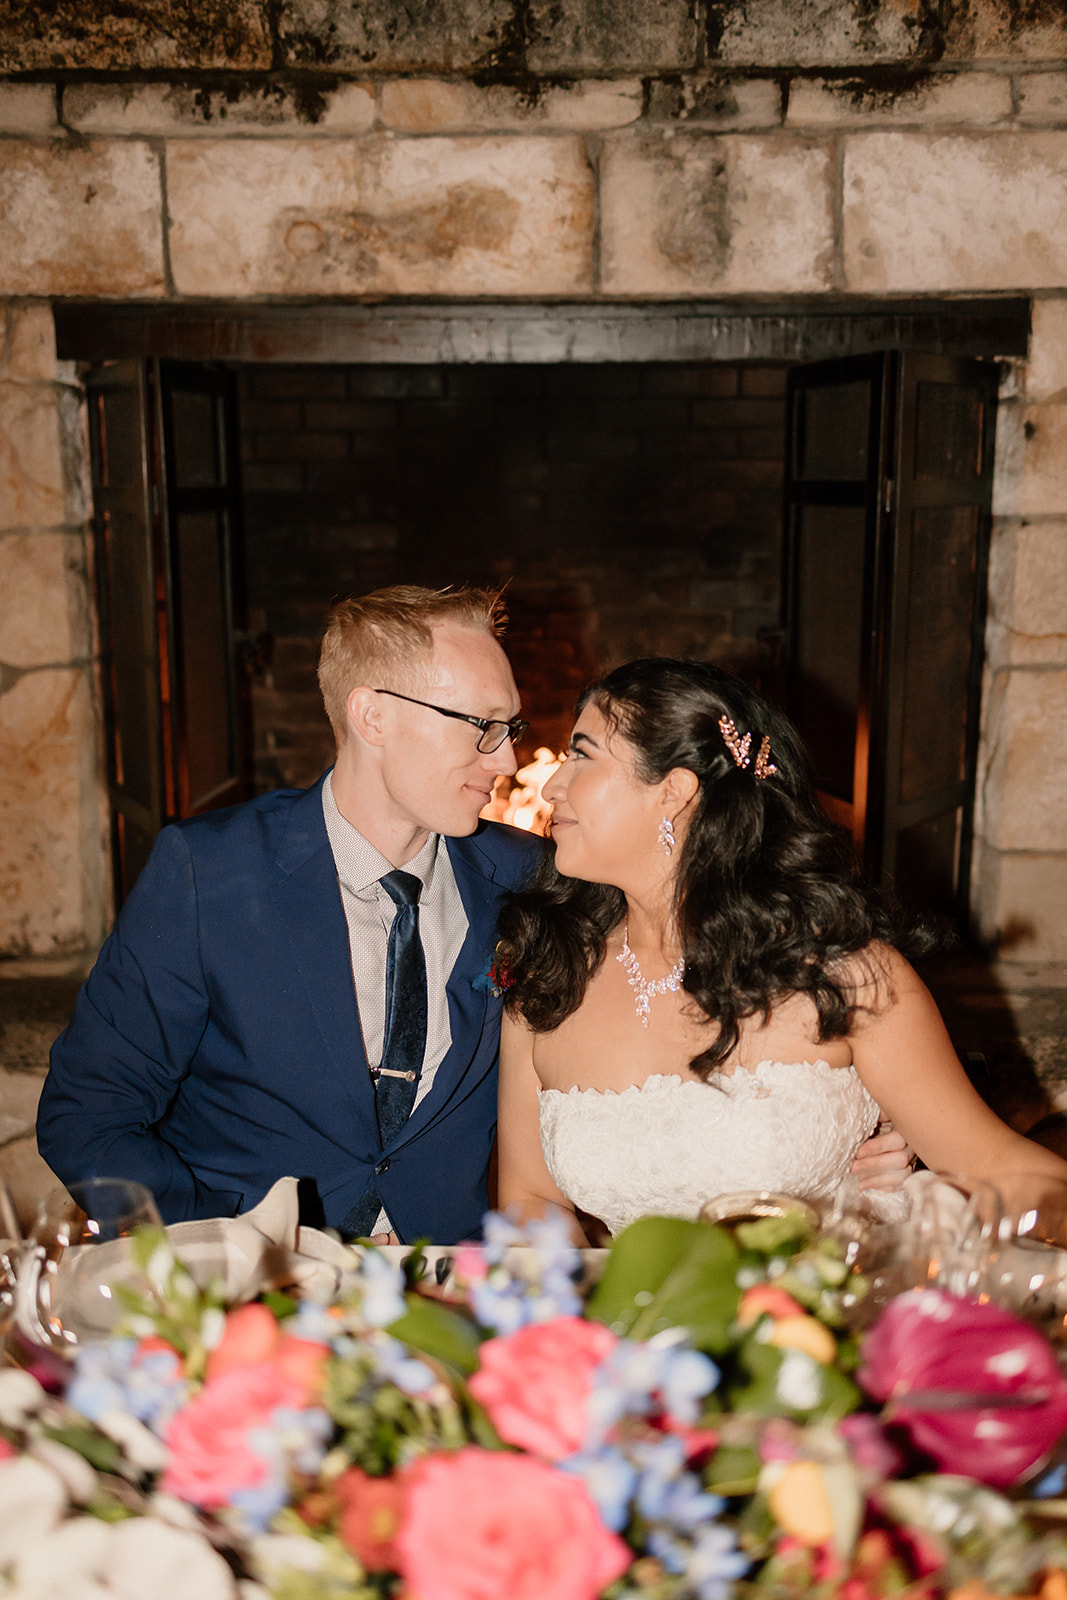 A bride and groom kissing at a banquet table with colorful floral arrangements, in front of a stone fireplace.